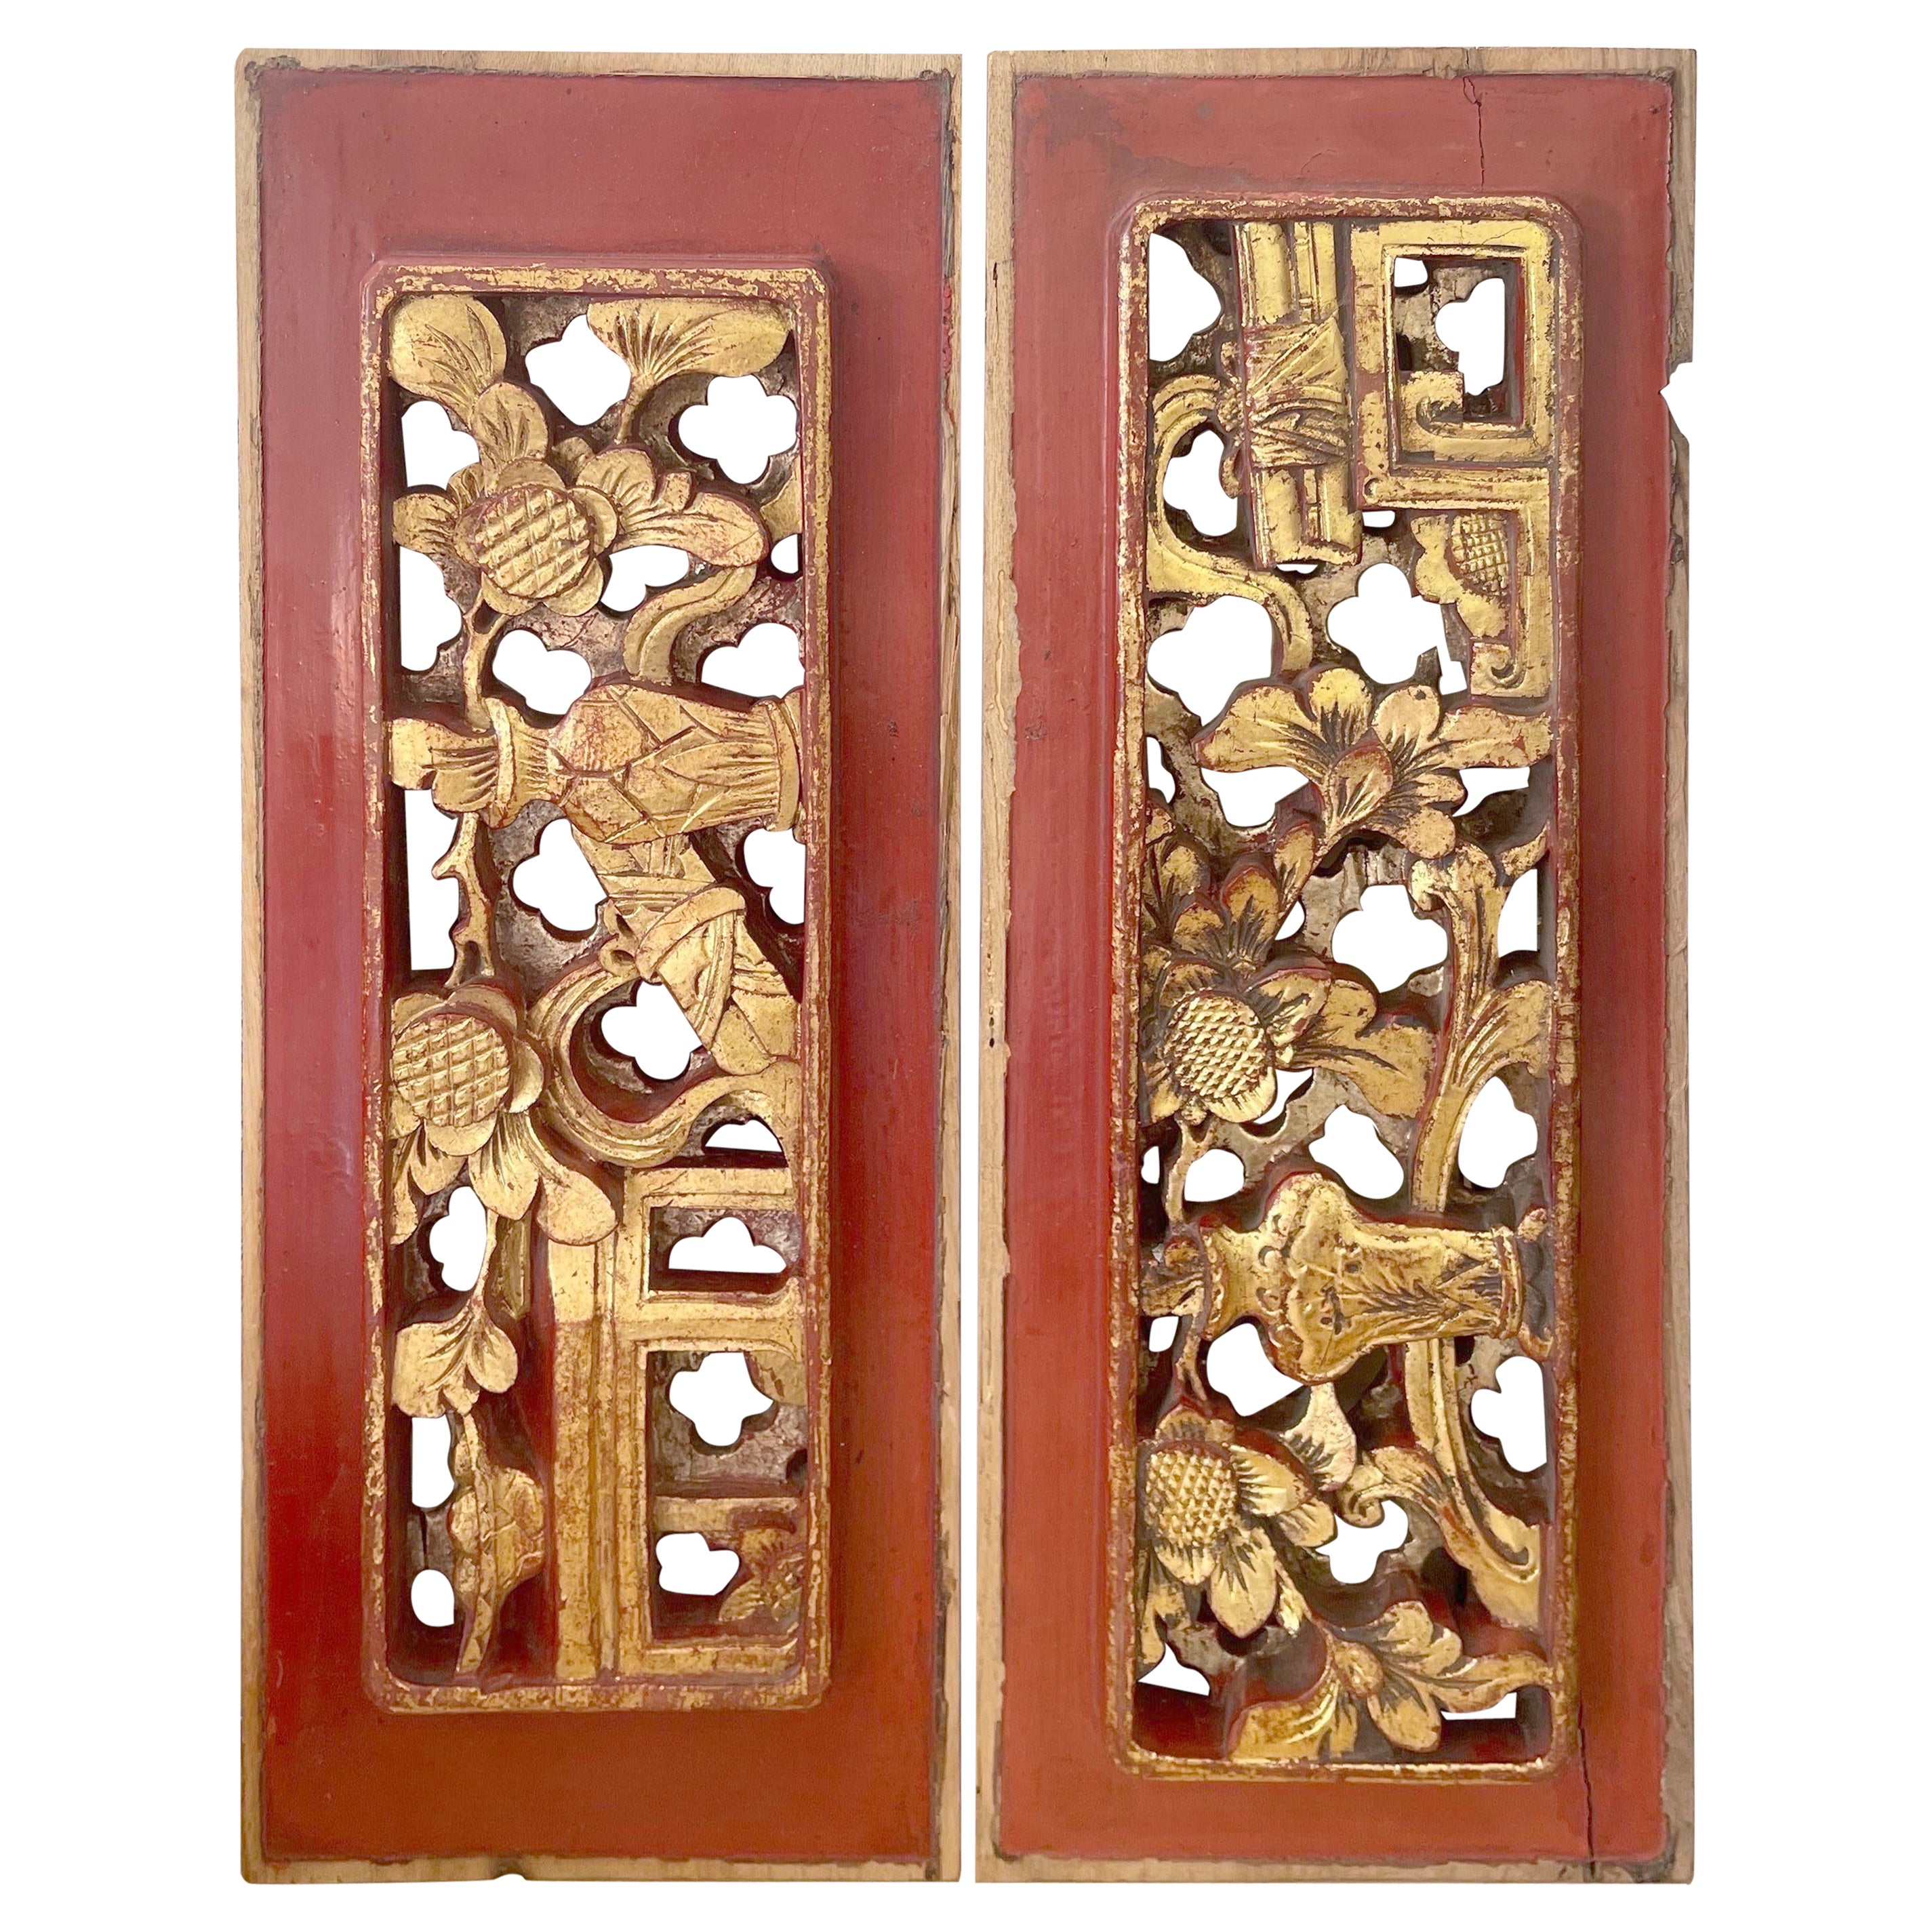 Possibly Antique Wood Panels with Intricate Hand Carving Pair